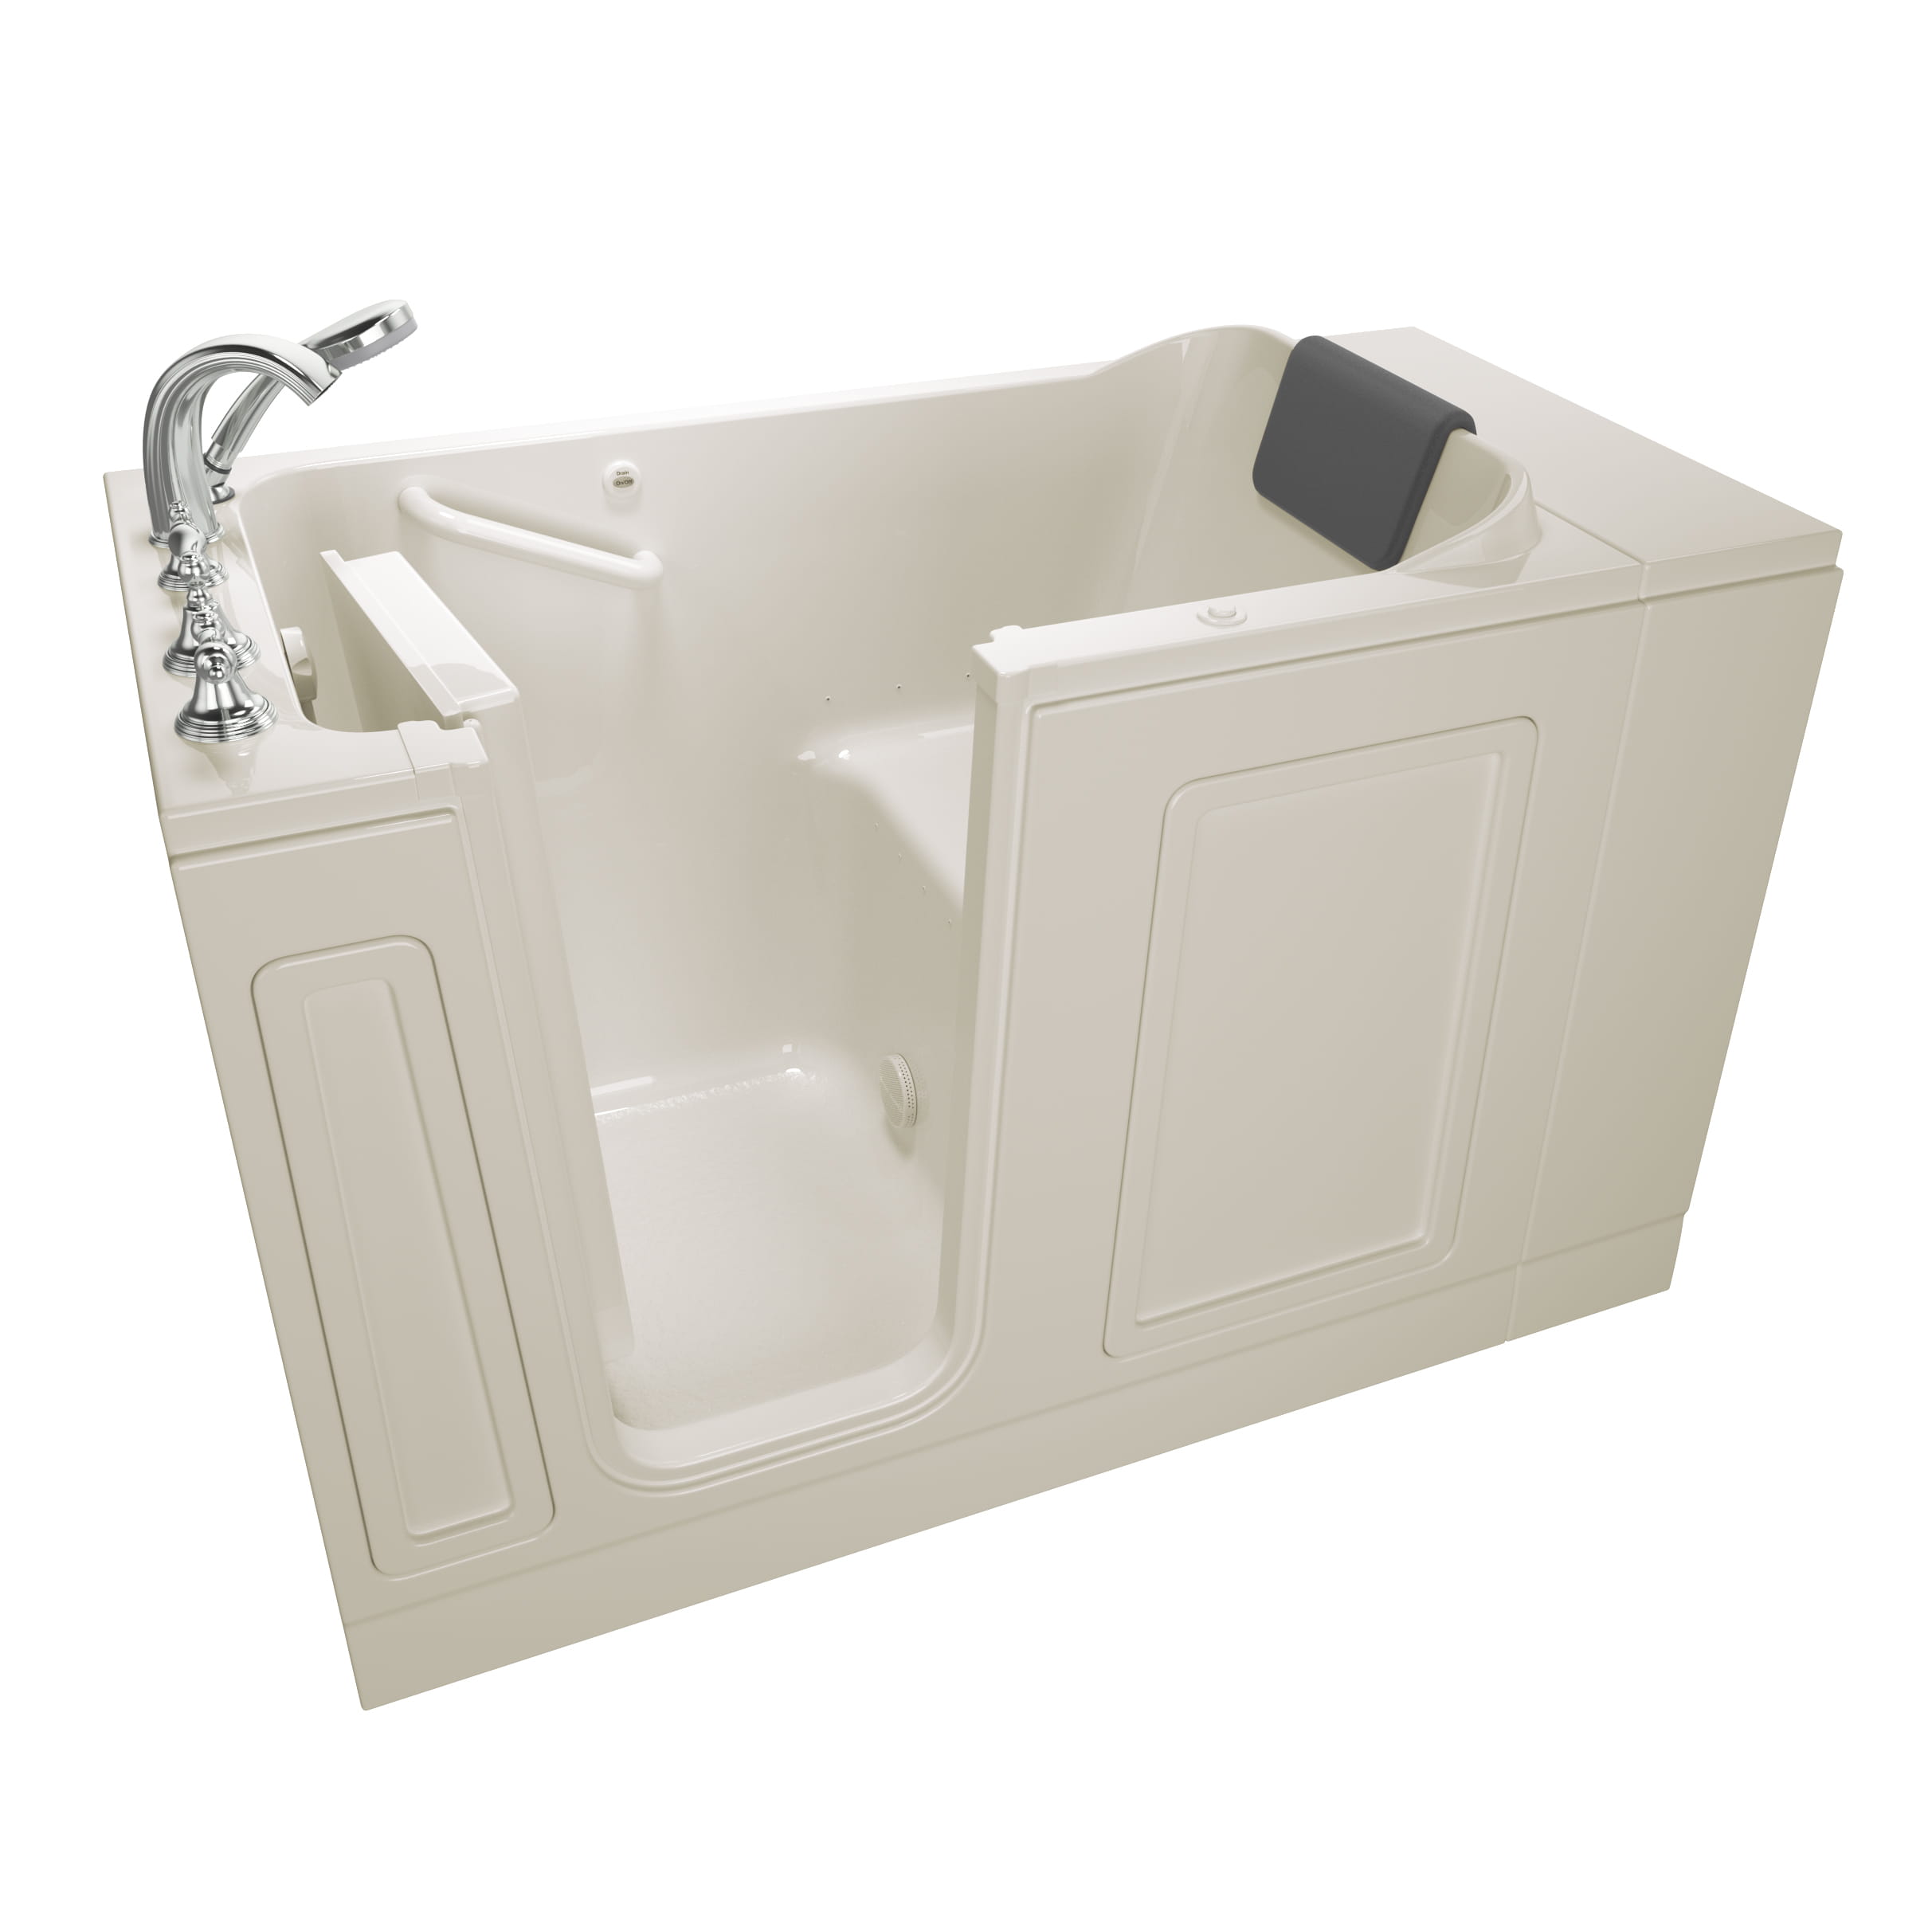 Acrylic Luxury Series 30 x 51  Inch Walk in Tub With Air Spa System   Left Hand Drain With Faucet WIB LINEN